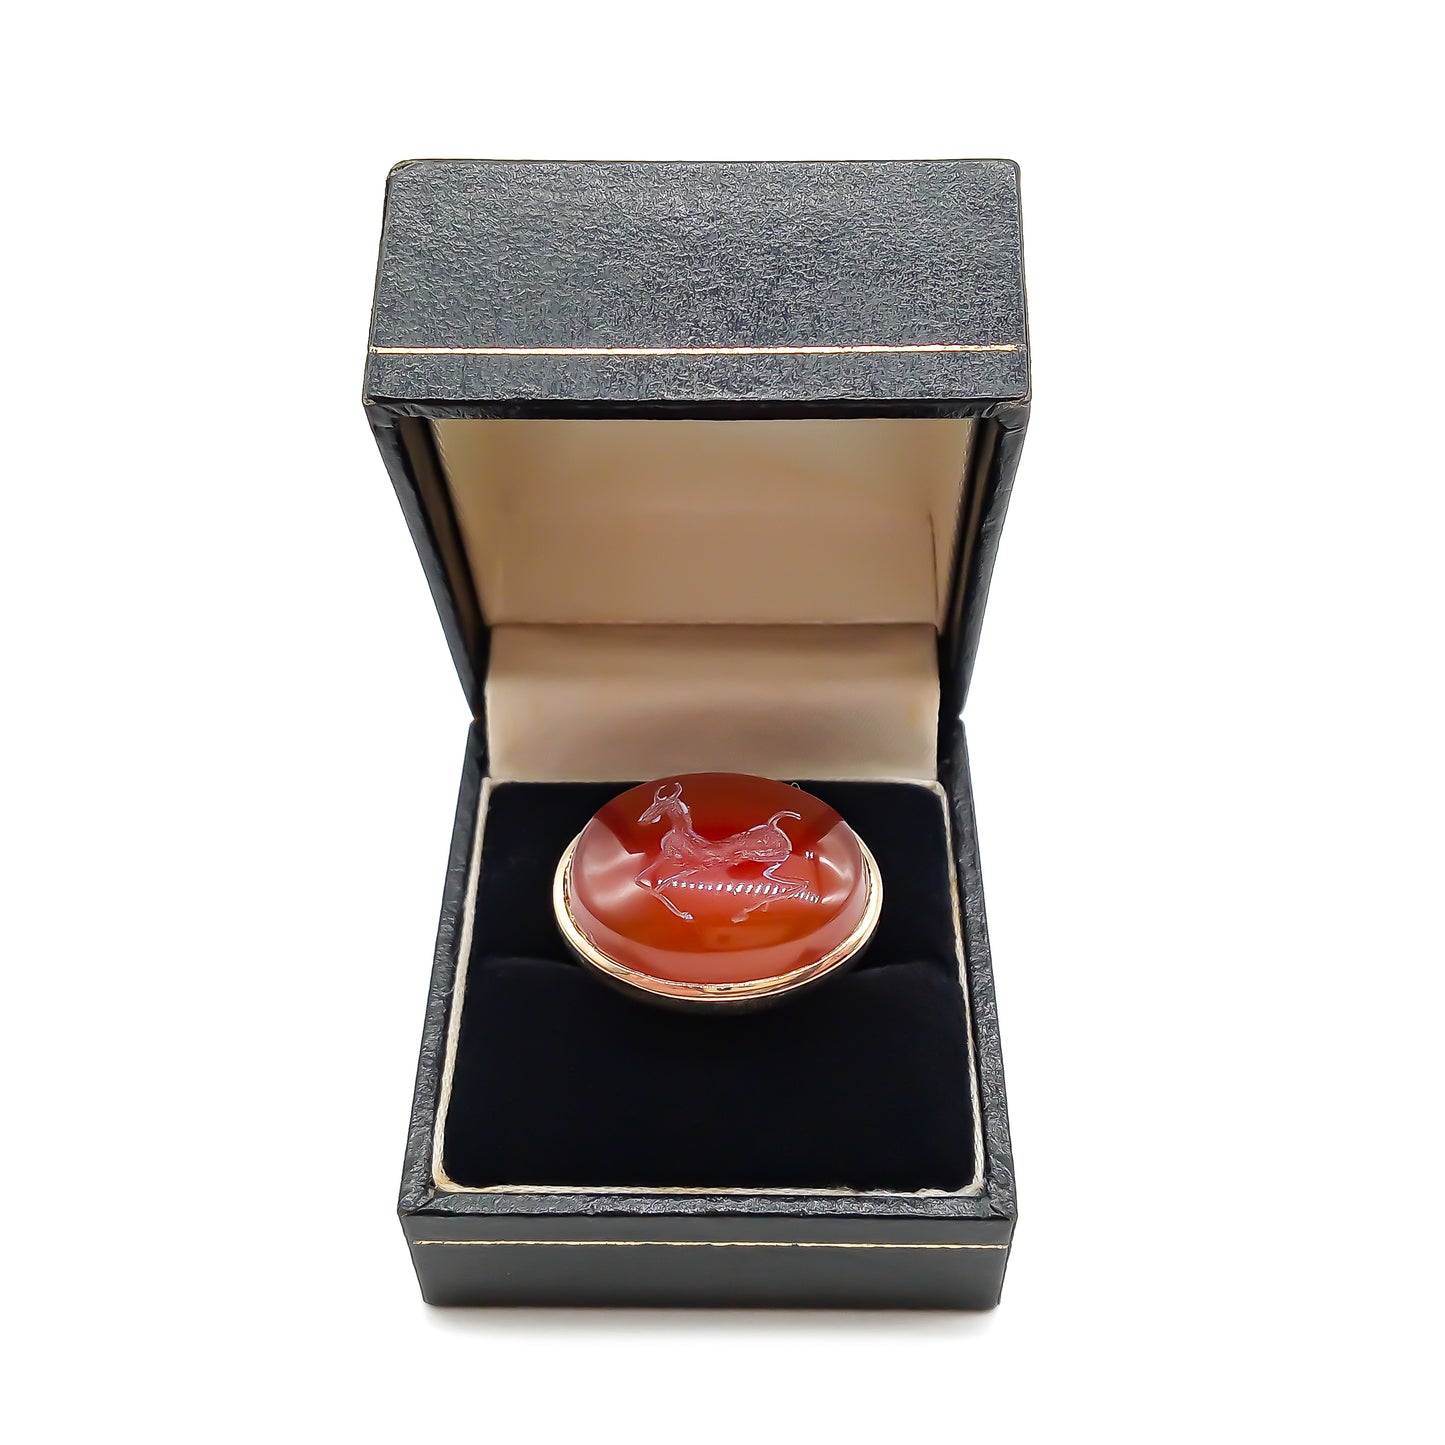 Unusual 9ct rose gold ring set with an antique oval carnelian intaglio depicting a stag.